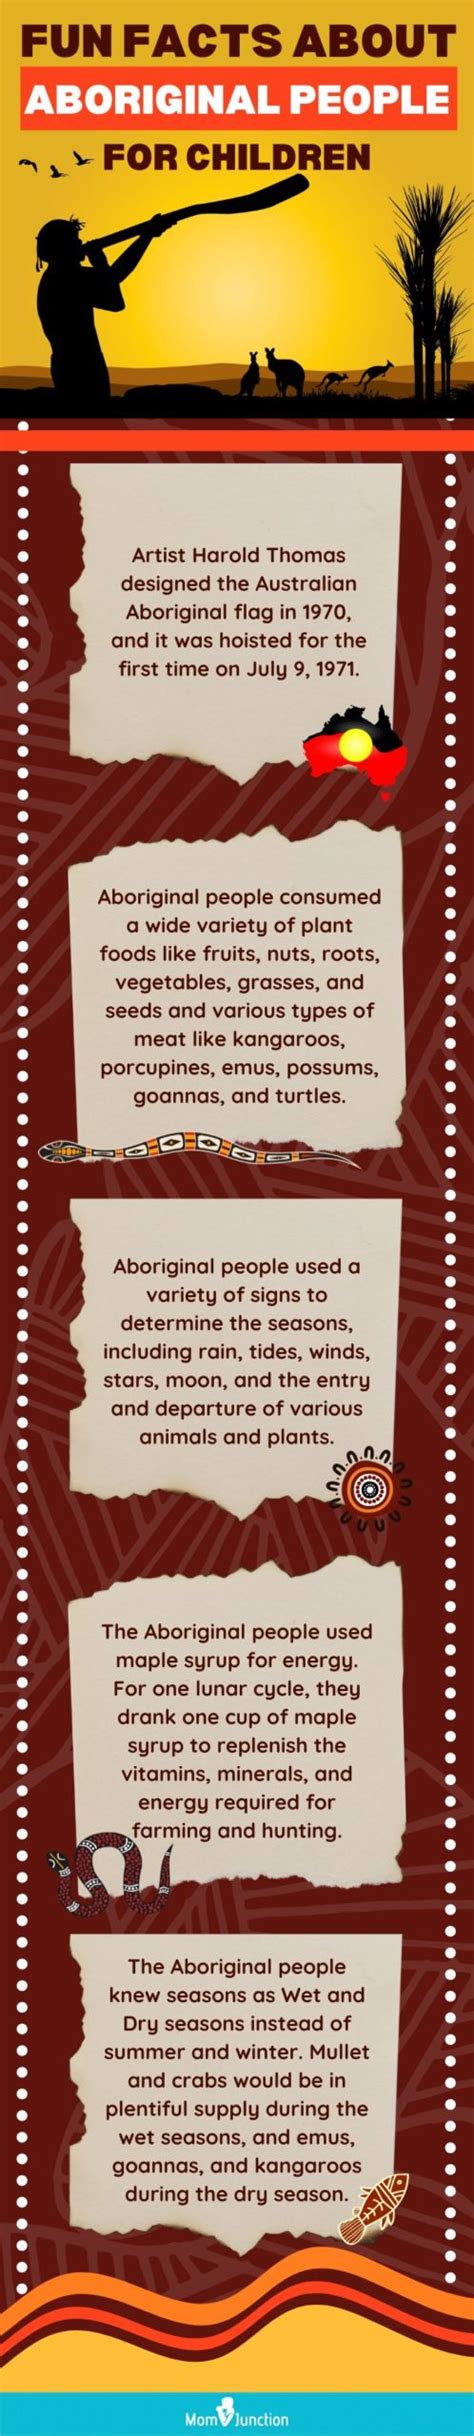 Fun Facts And Information About Aboriginal People For Kids